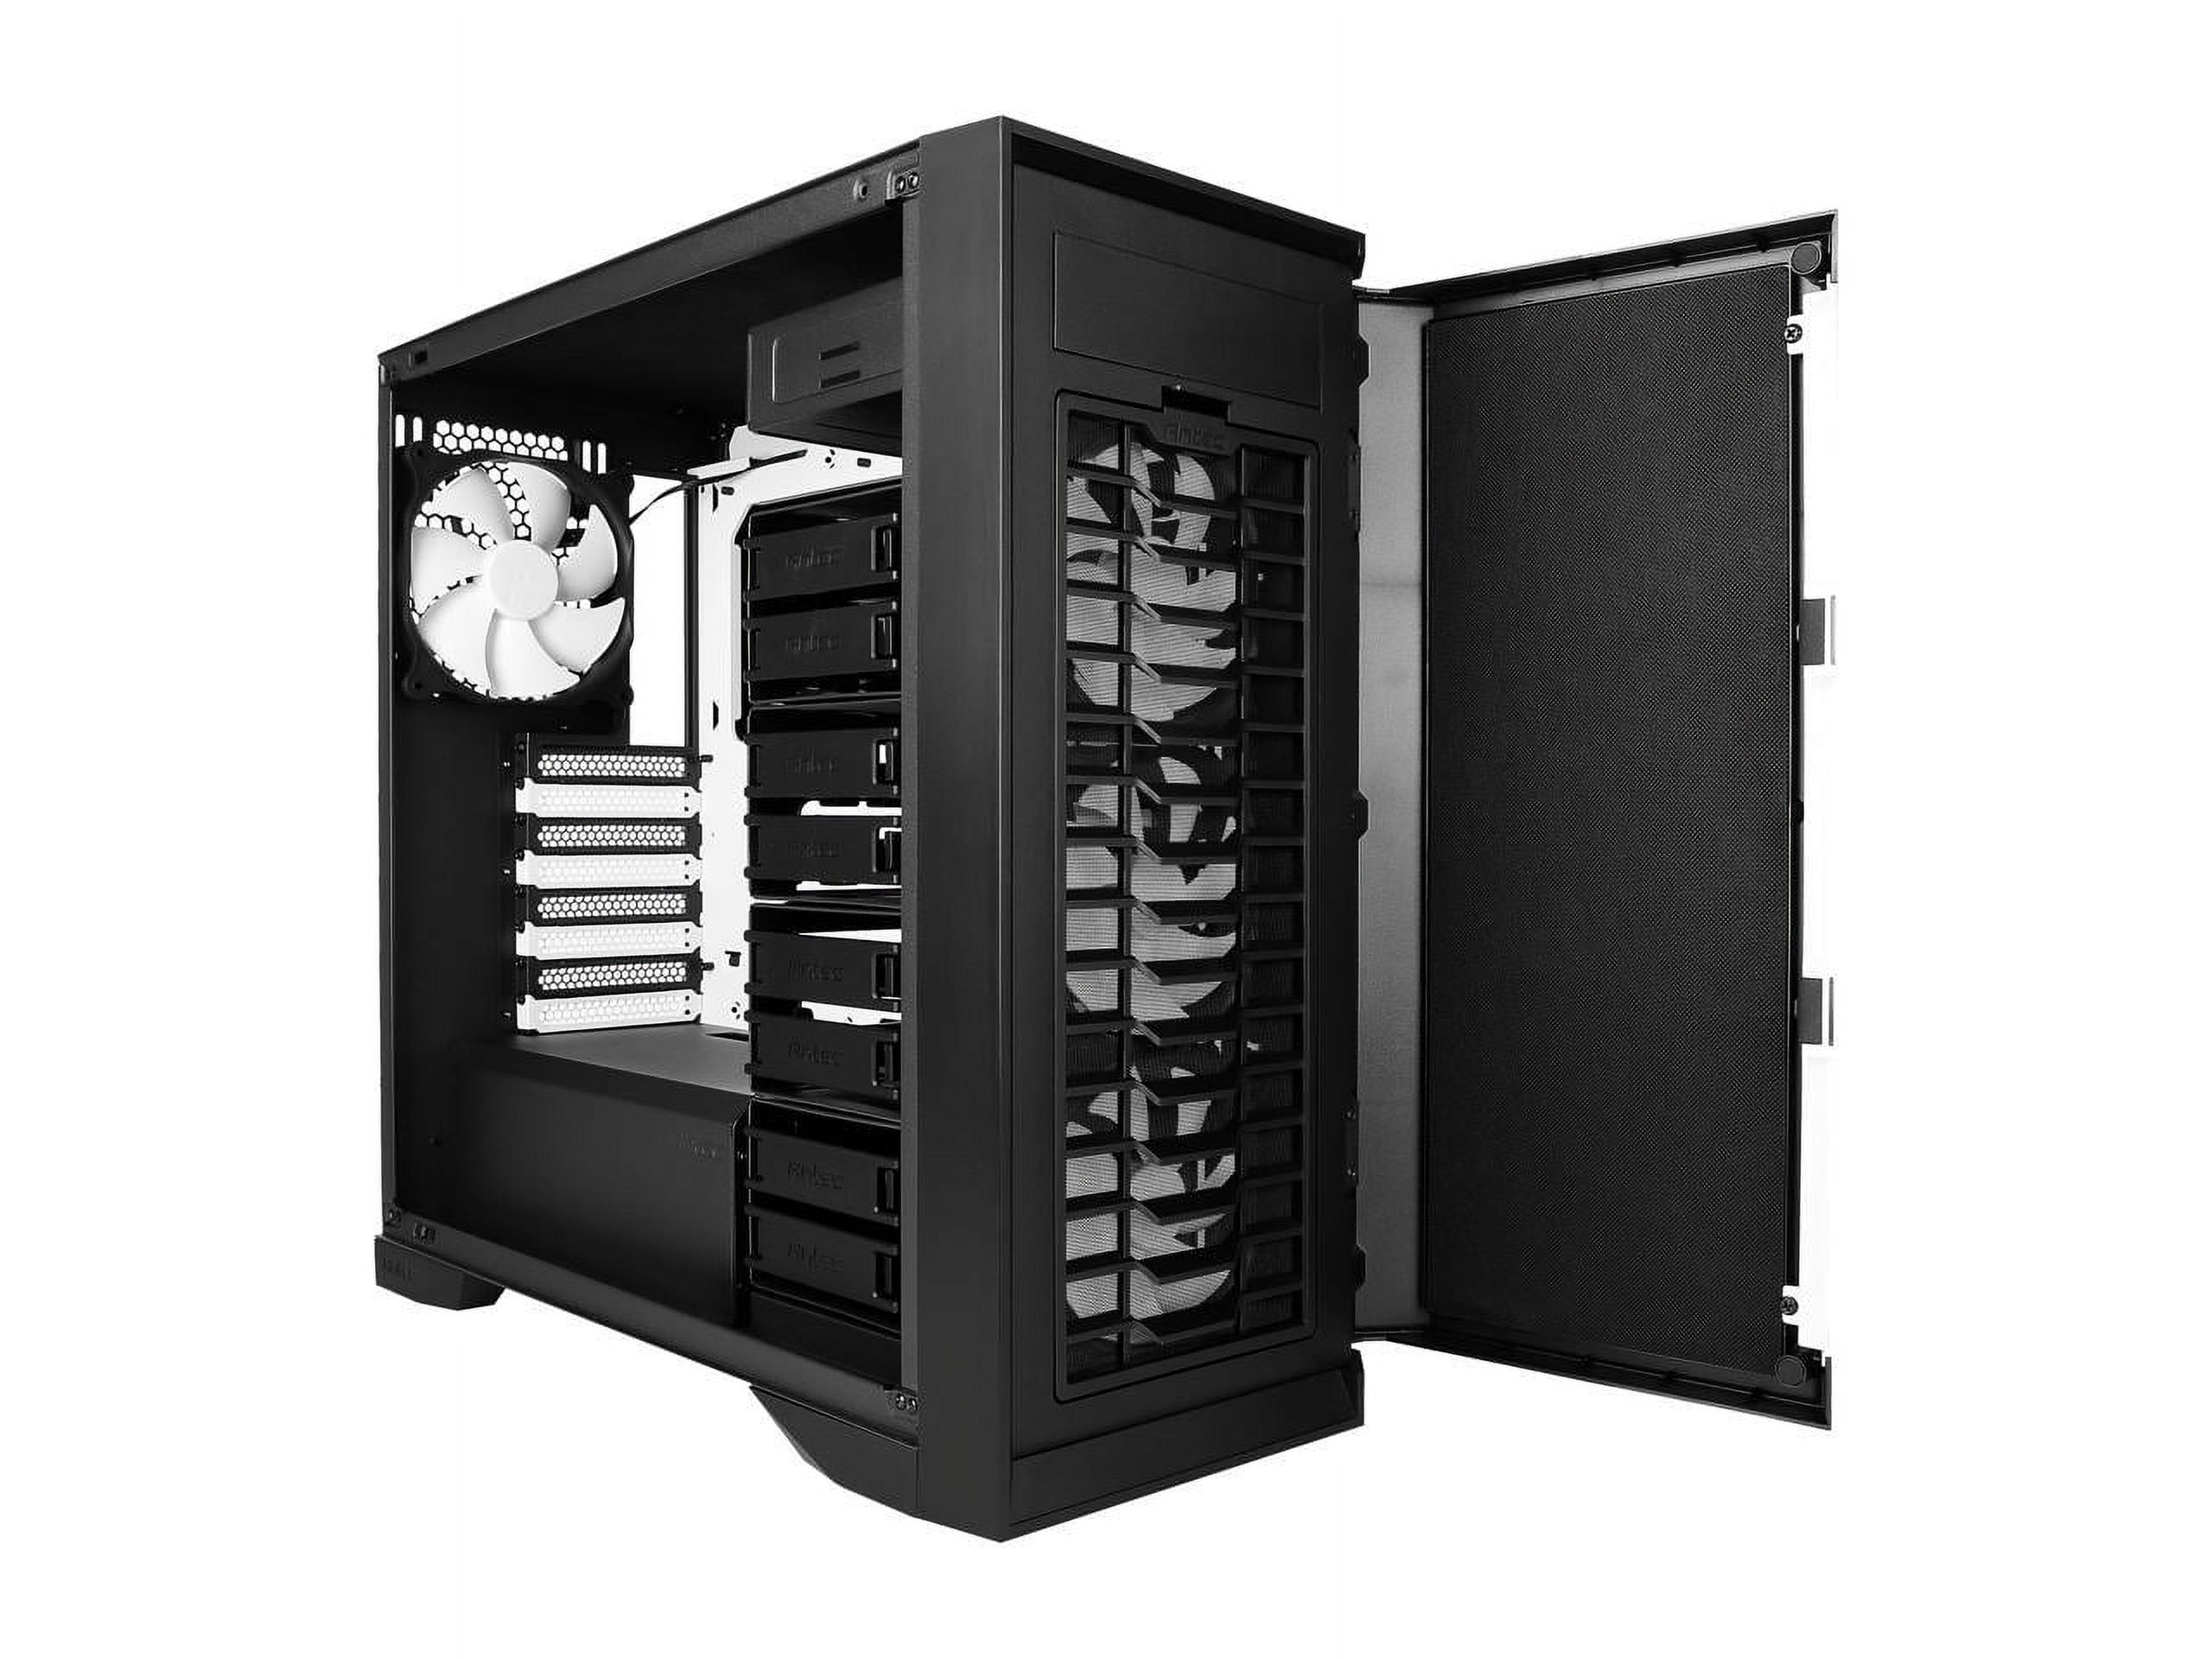 Antec Performance Series P101 Silent Black 0.8mm SPCC ATX Mid Tower Case with 8 x 3.5" HDD / 2.5" SSD Removable Bays - image 5 of 19